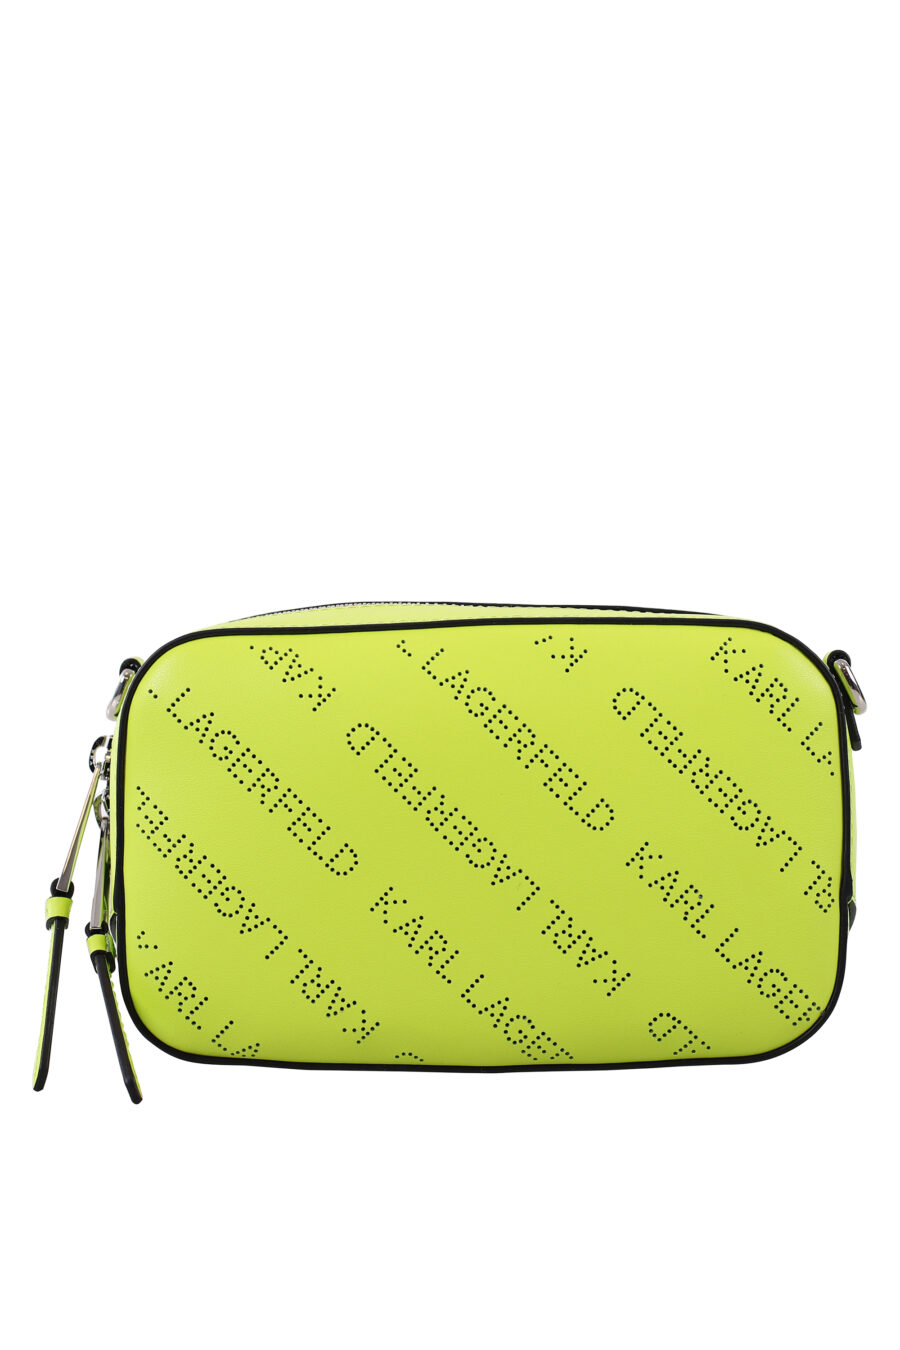 Lime green shoulder bag with perforated logo - IMG 1741